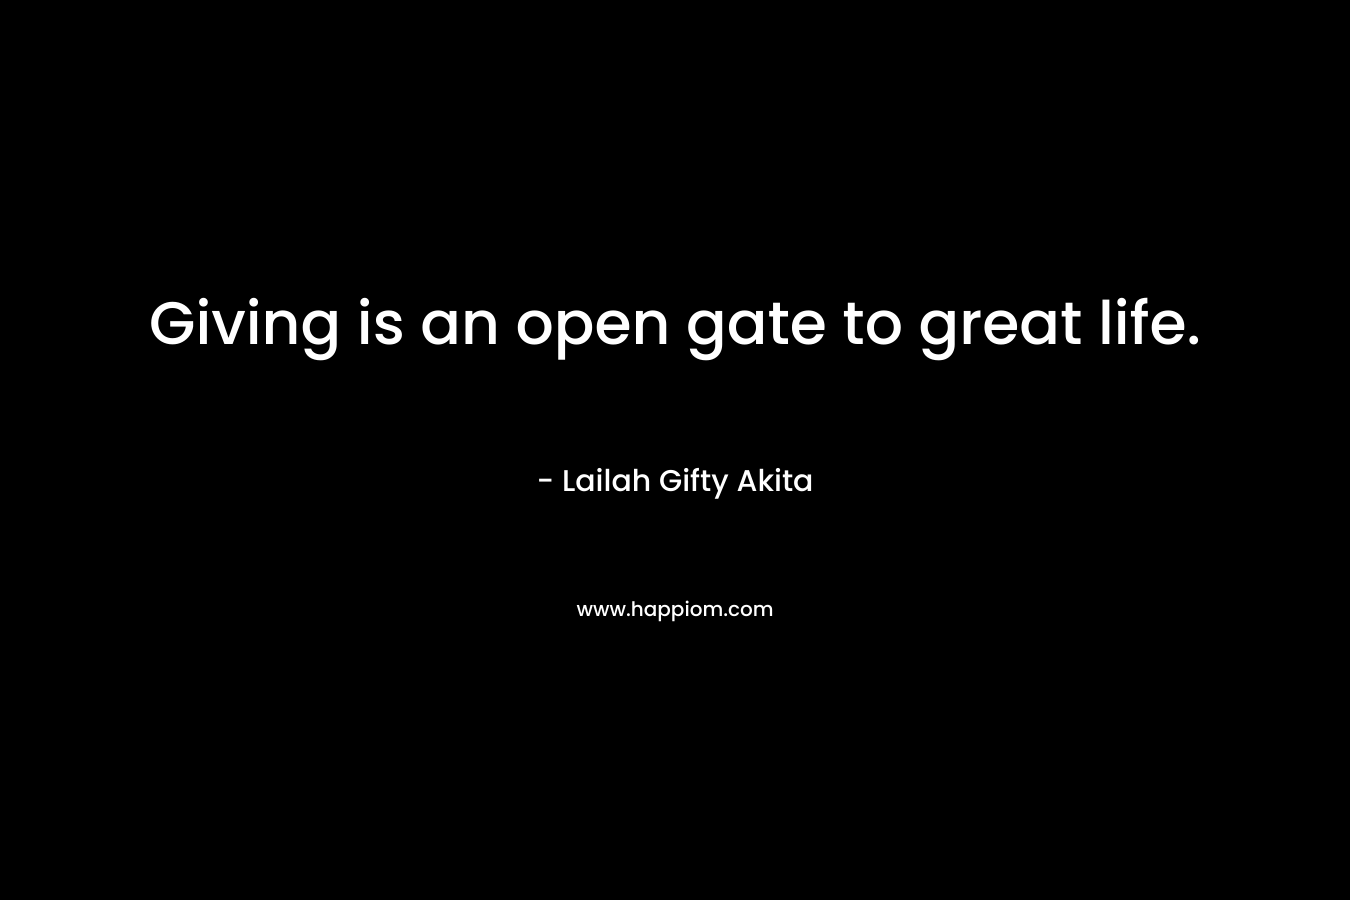 Giving is an open gate to great life.